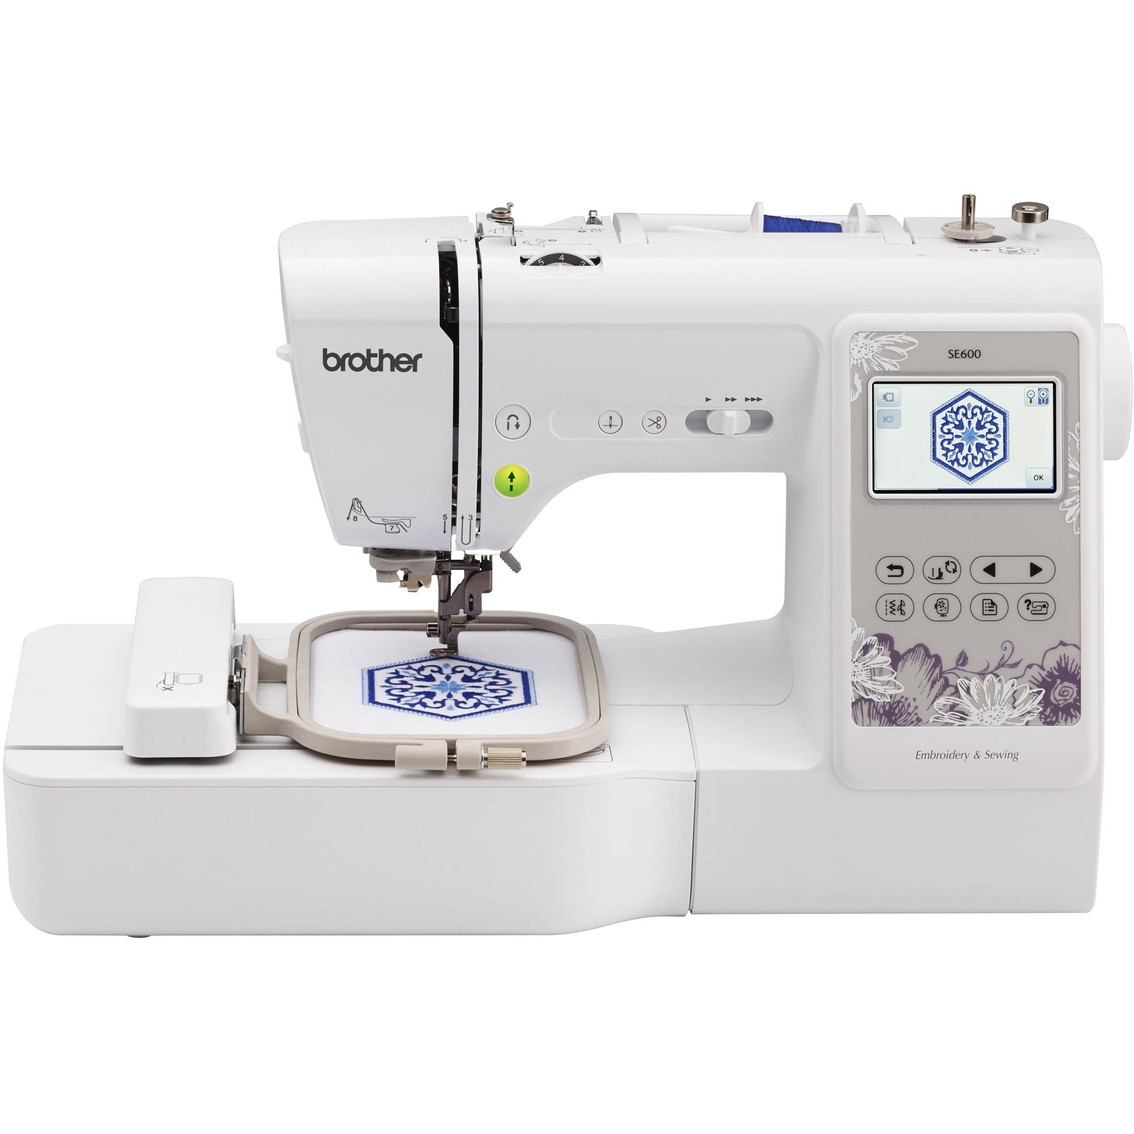  Brother Sewing and Embroidery Machine, 4 Star Wars